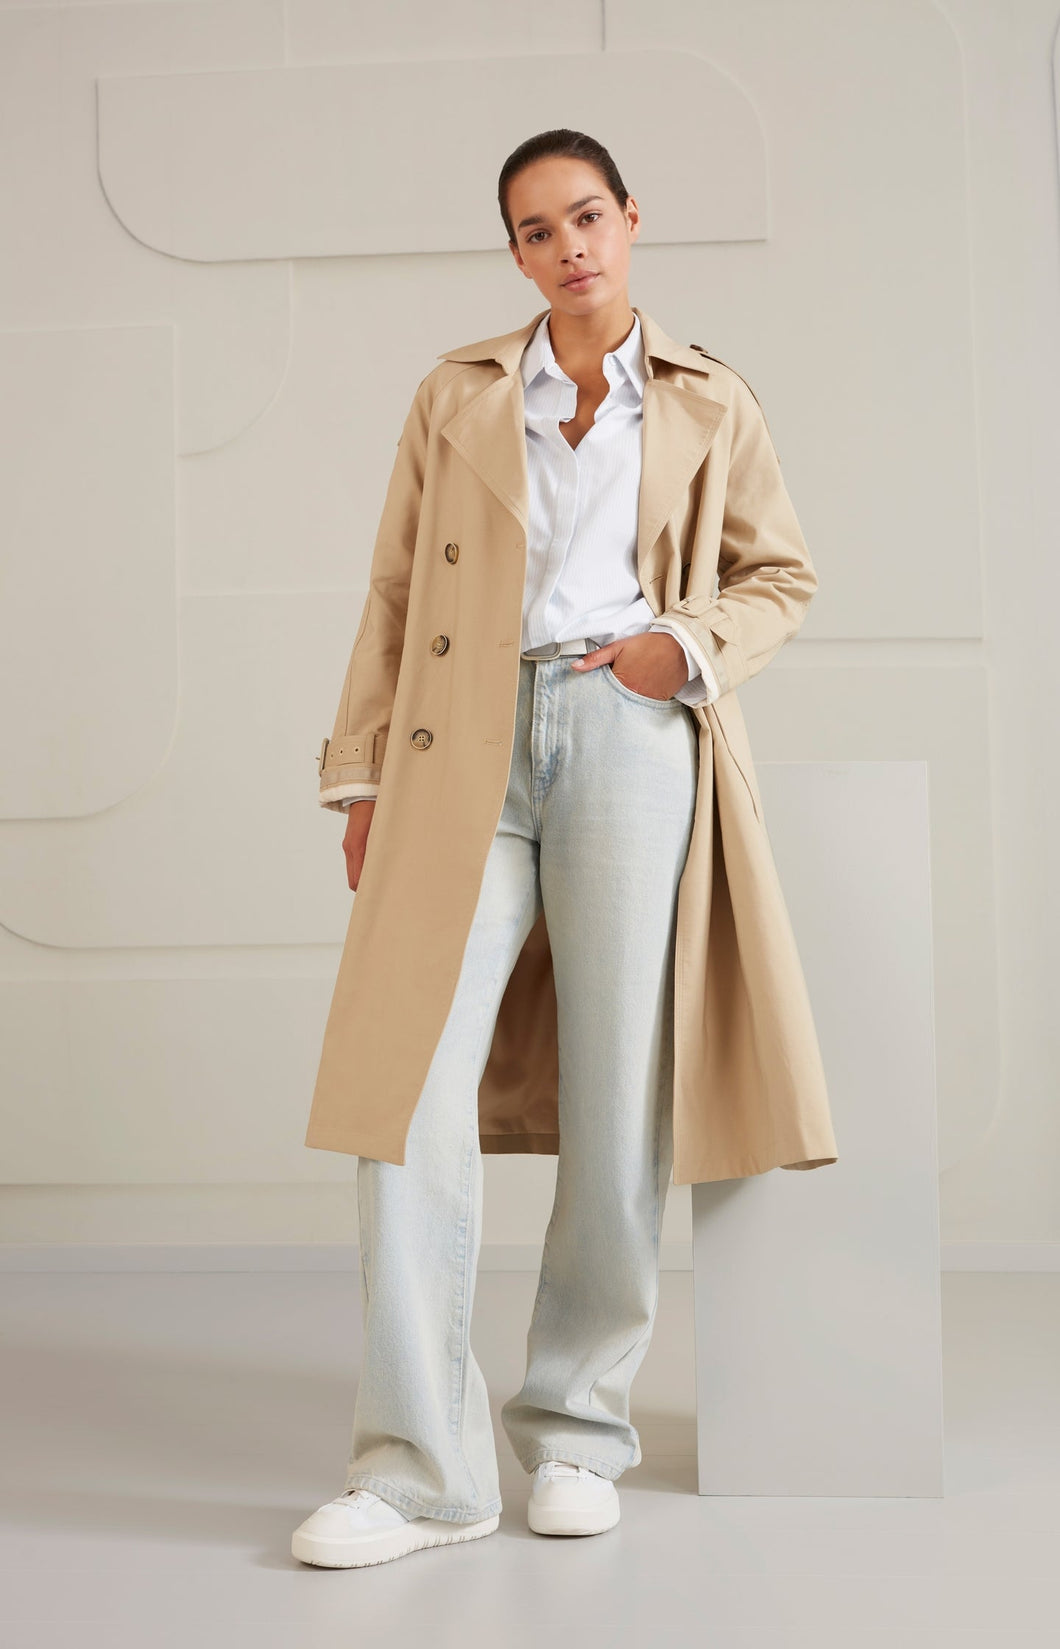 Double breasted trench coat with long sleeves, pockets and belt